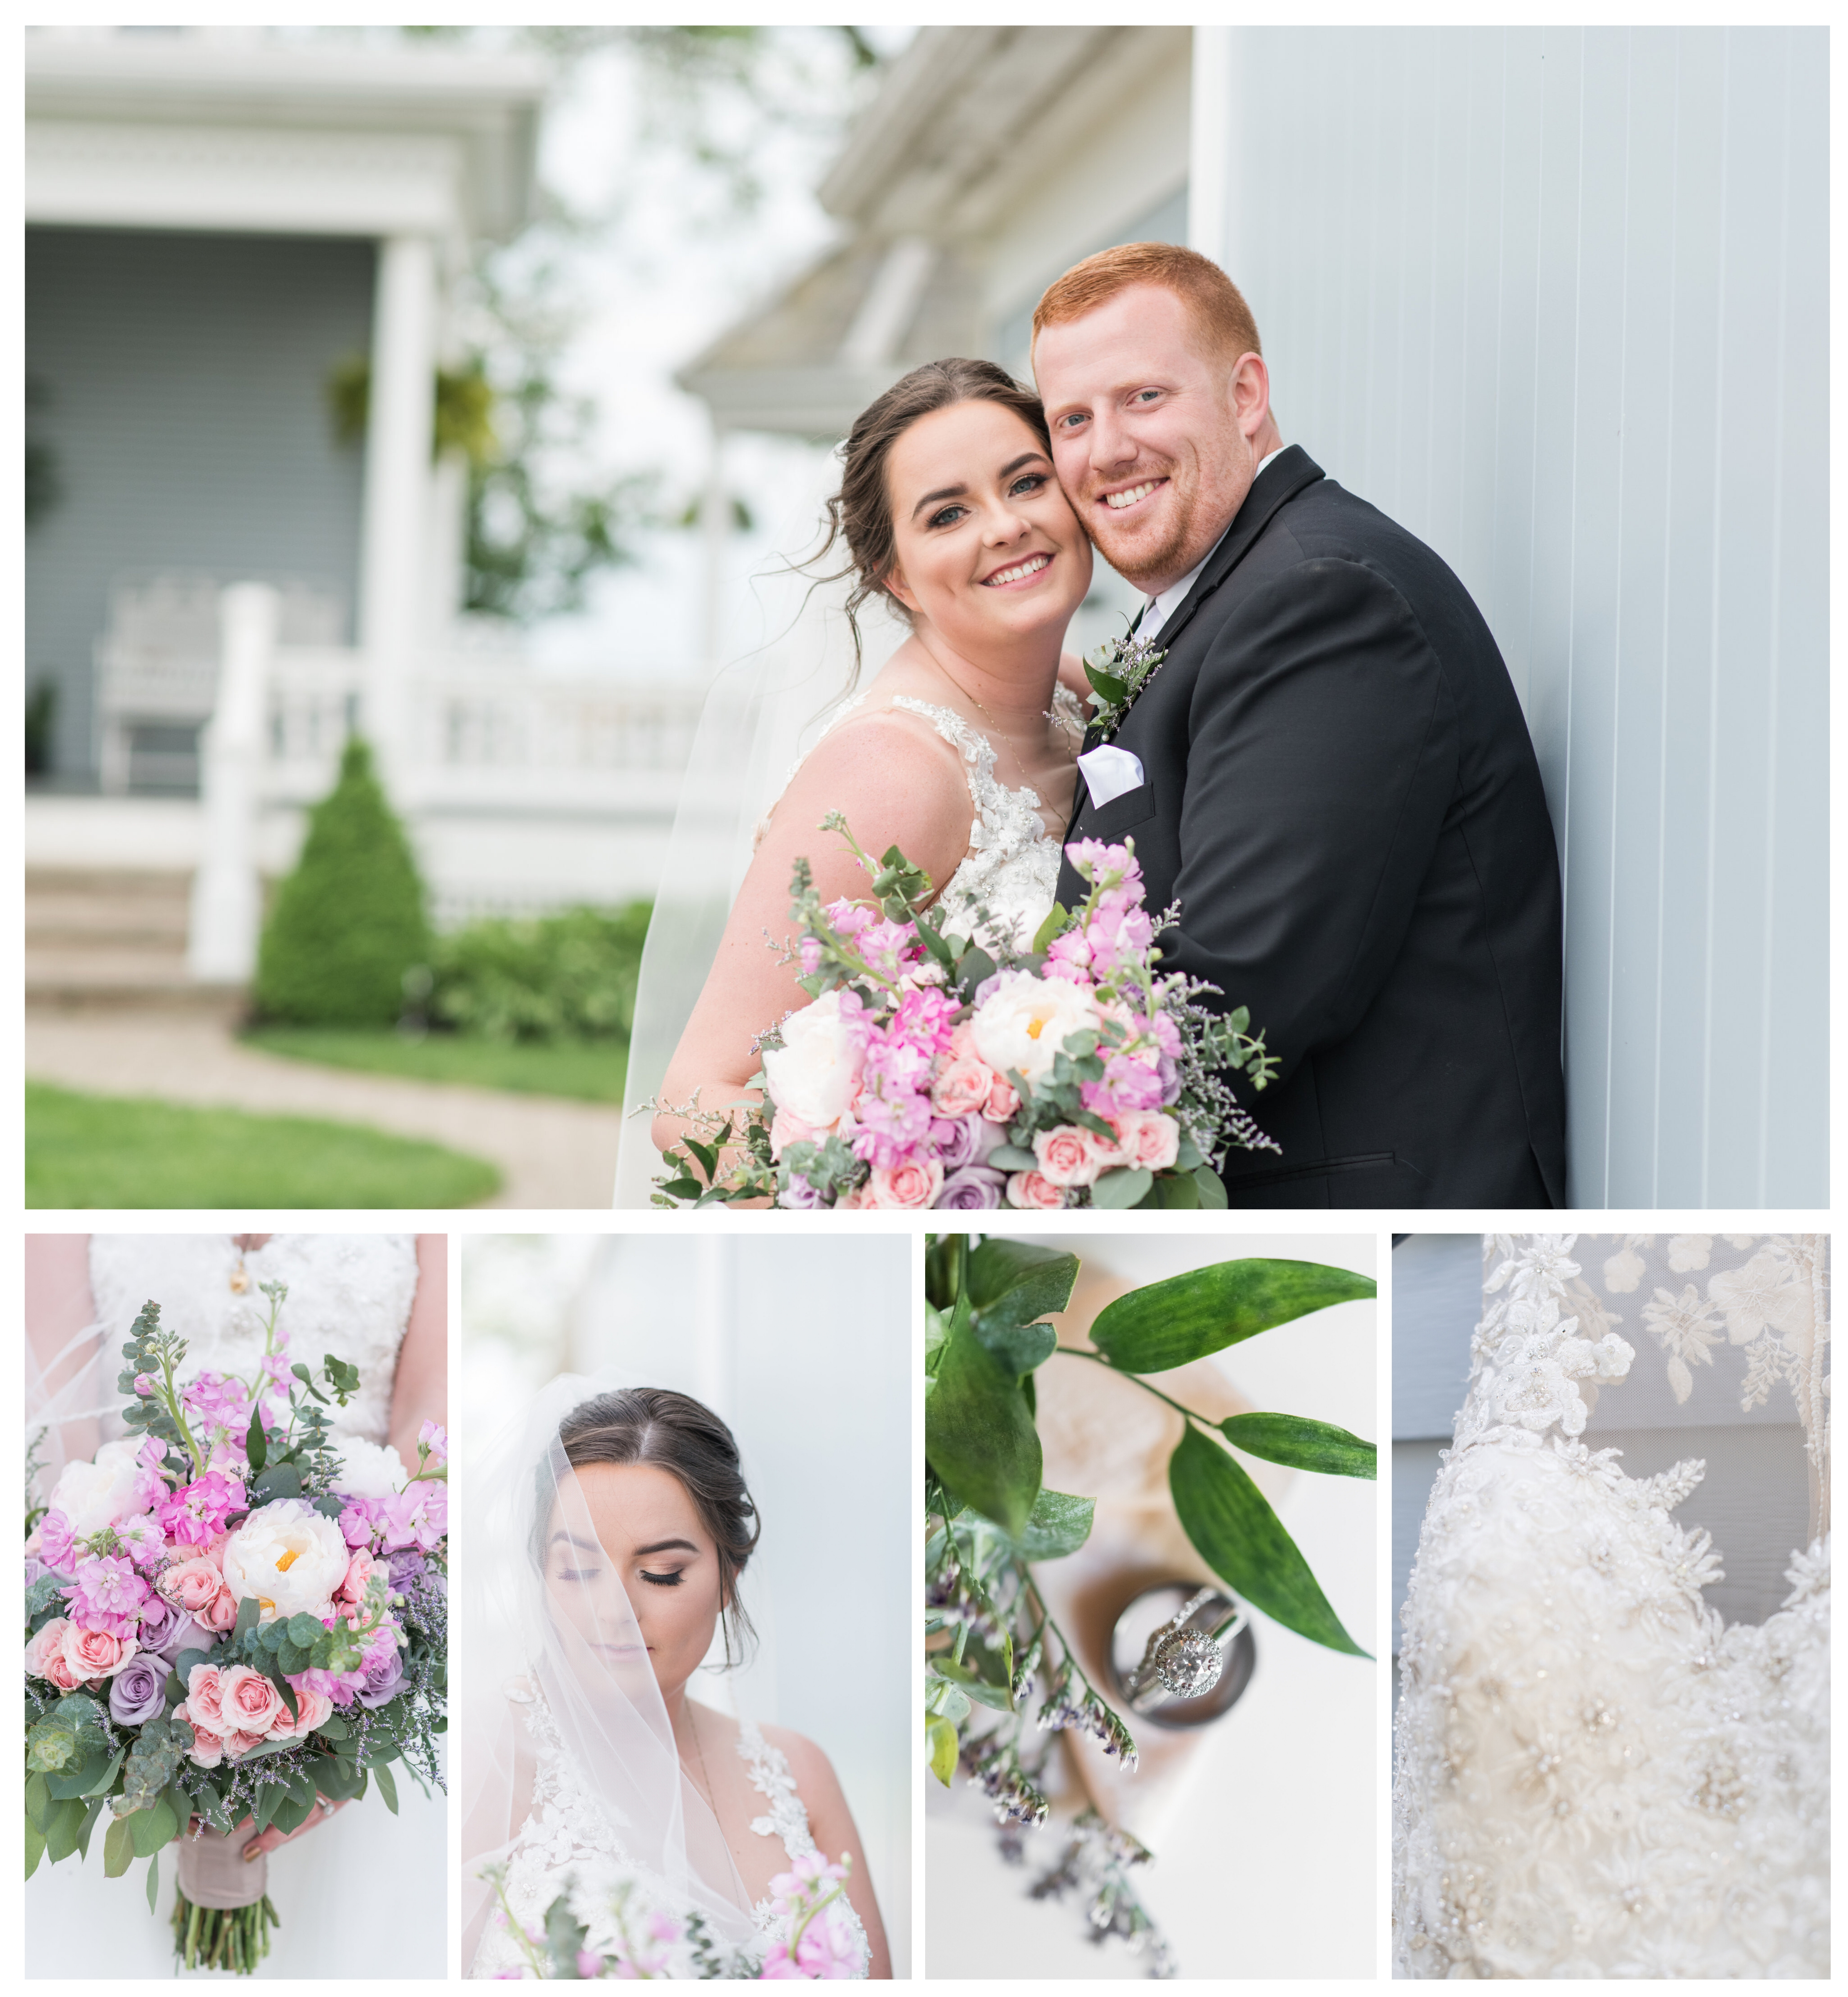 Pretty Prairie Farms wedding day in Urbana OH photographed by Pipers Photography